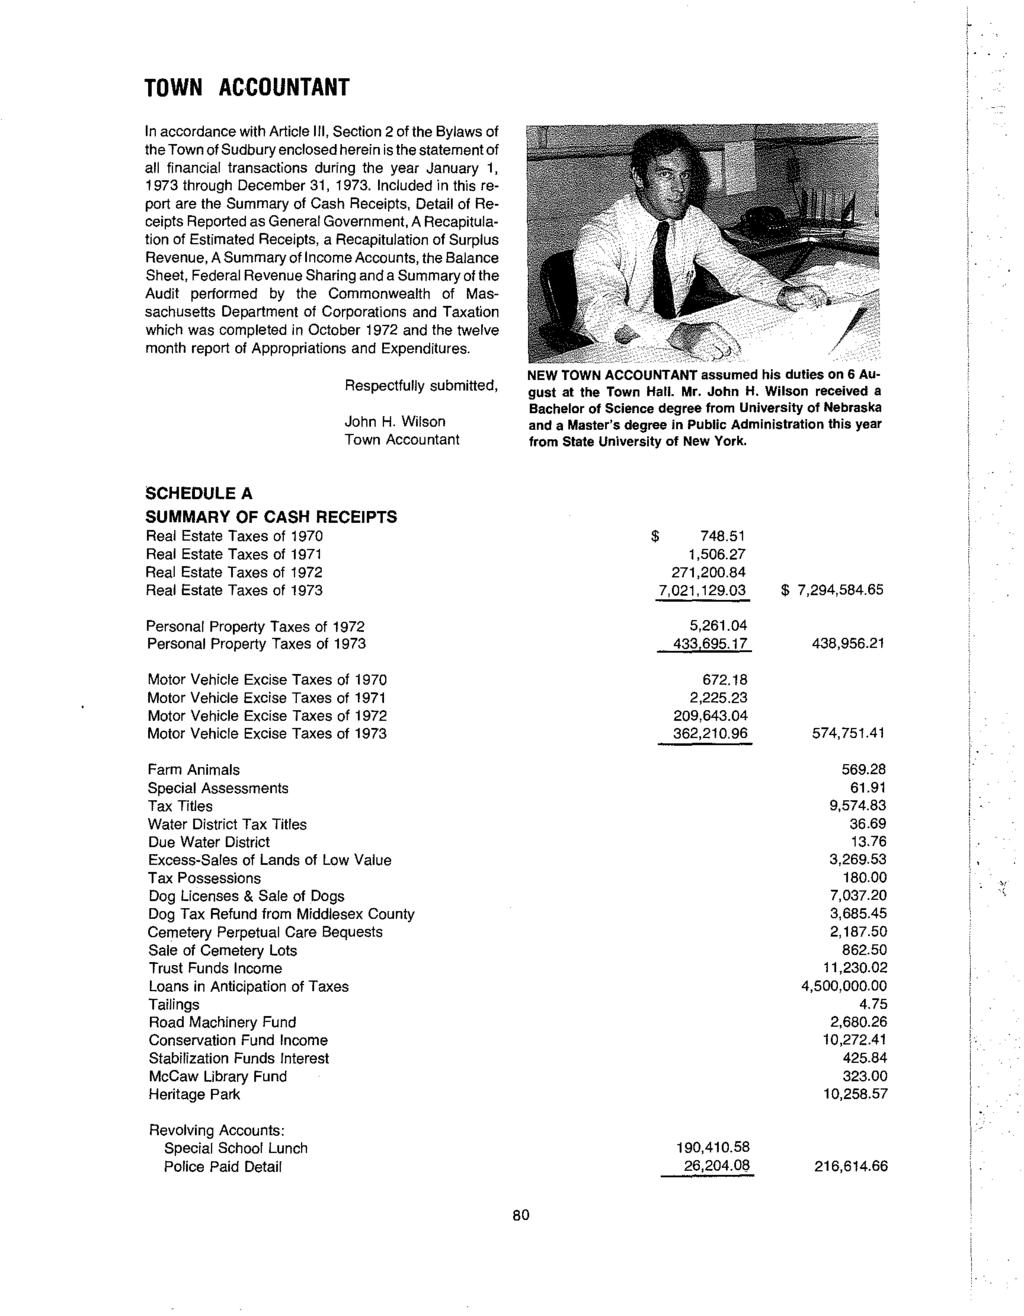 TOWN ACCOUNTANT In accordance with Article Ill, Section 2 of the Bylaws of the Town of Sudbury enclosed herein is the statement of all financial transactions during the year January 1, 1973 through